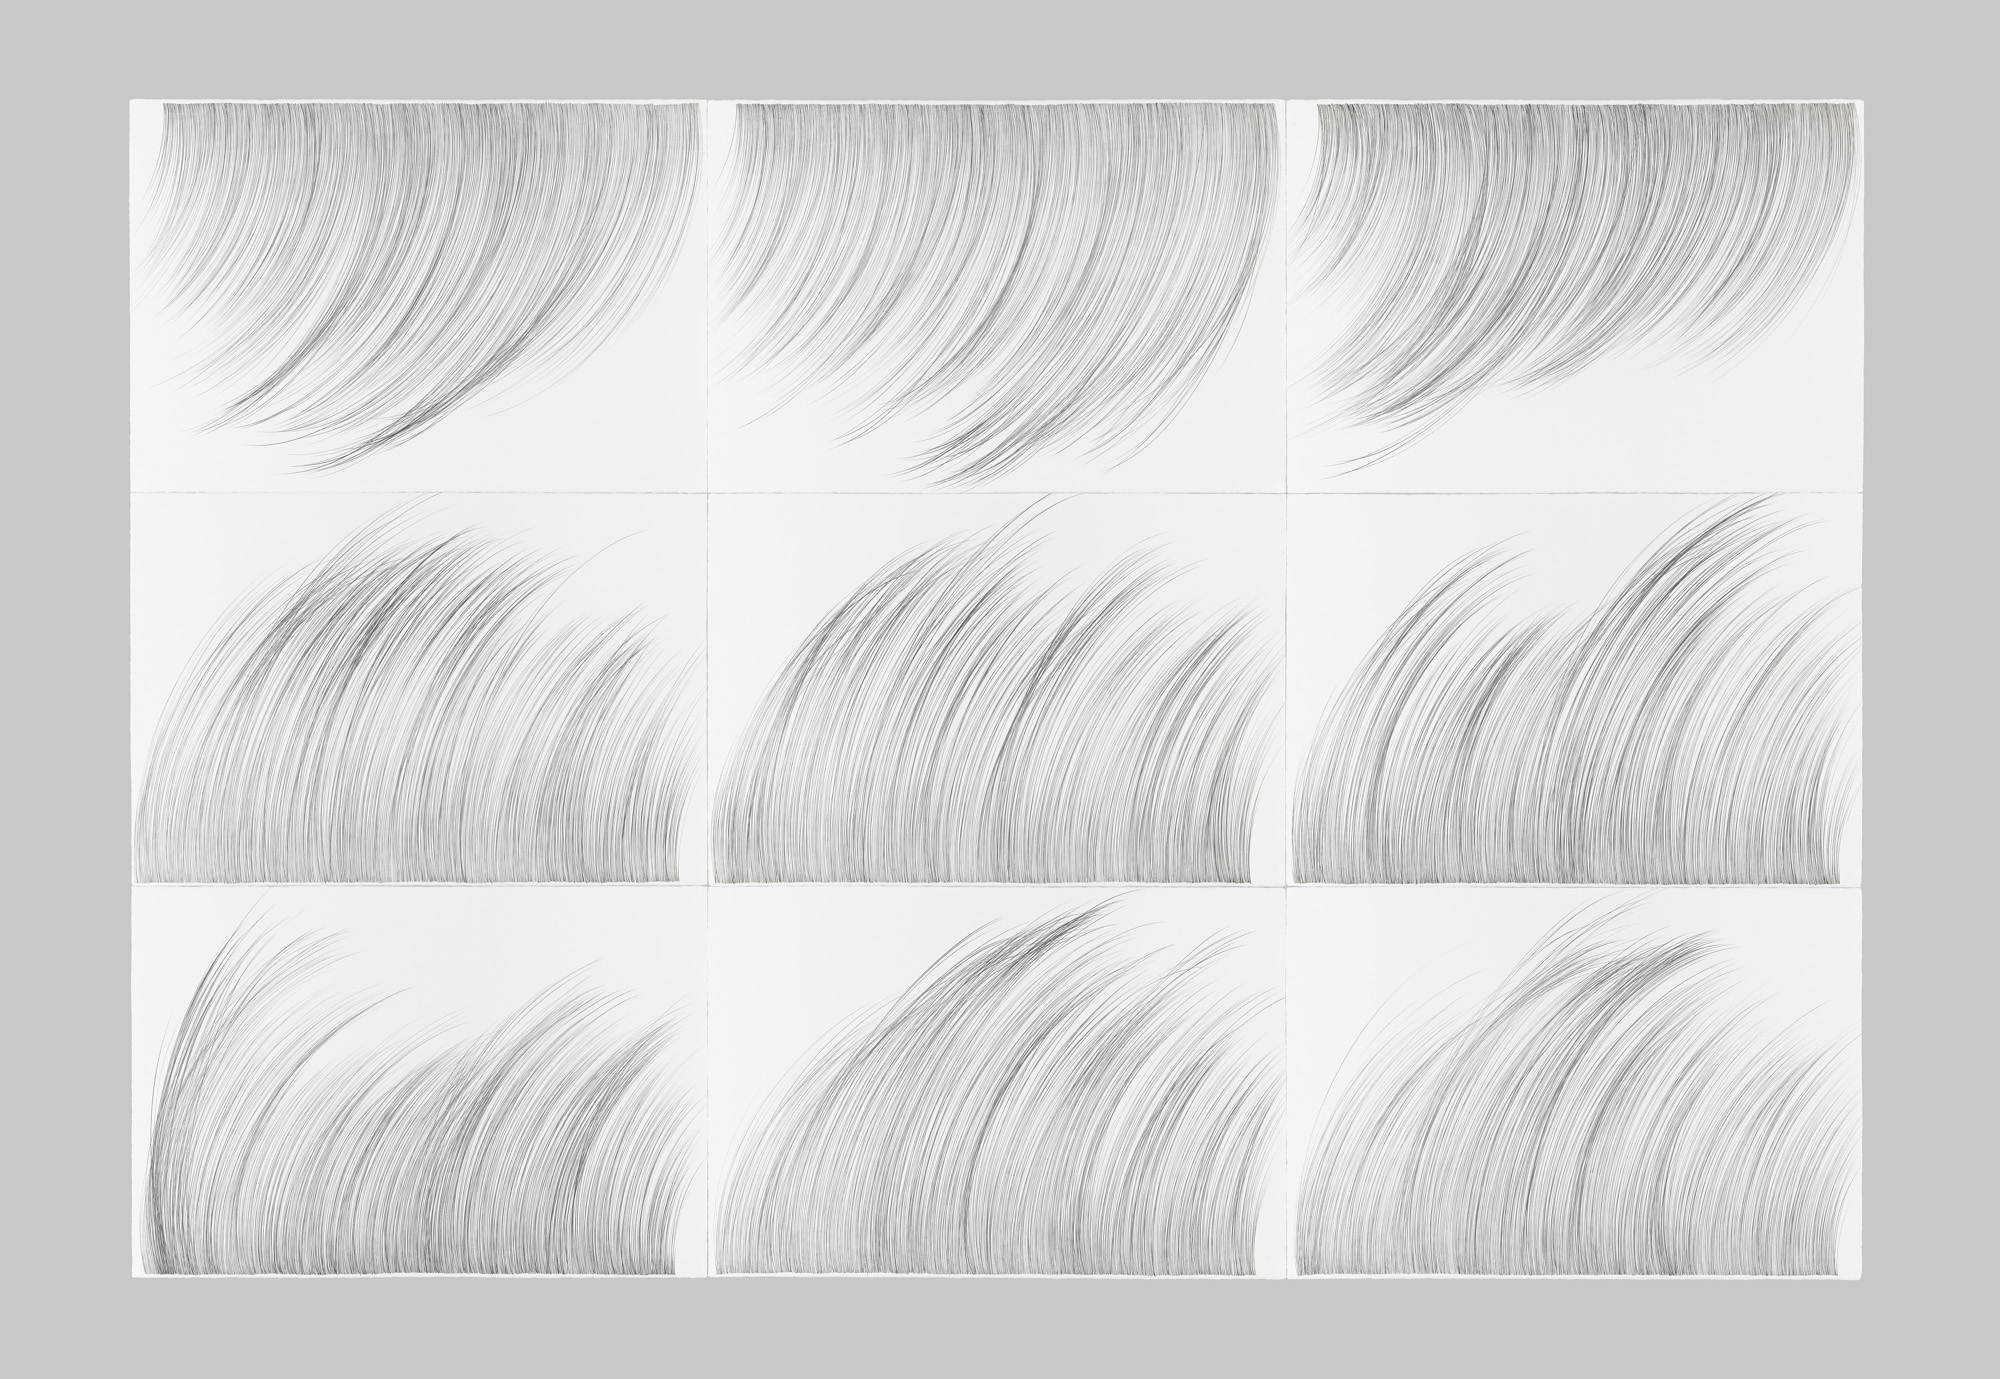 RainGrass for Section 21   Graphite on cotton paper , 90 x 132 inches, 9 panels, 2015